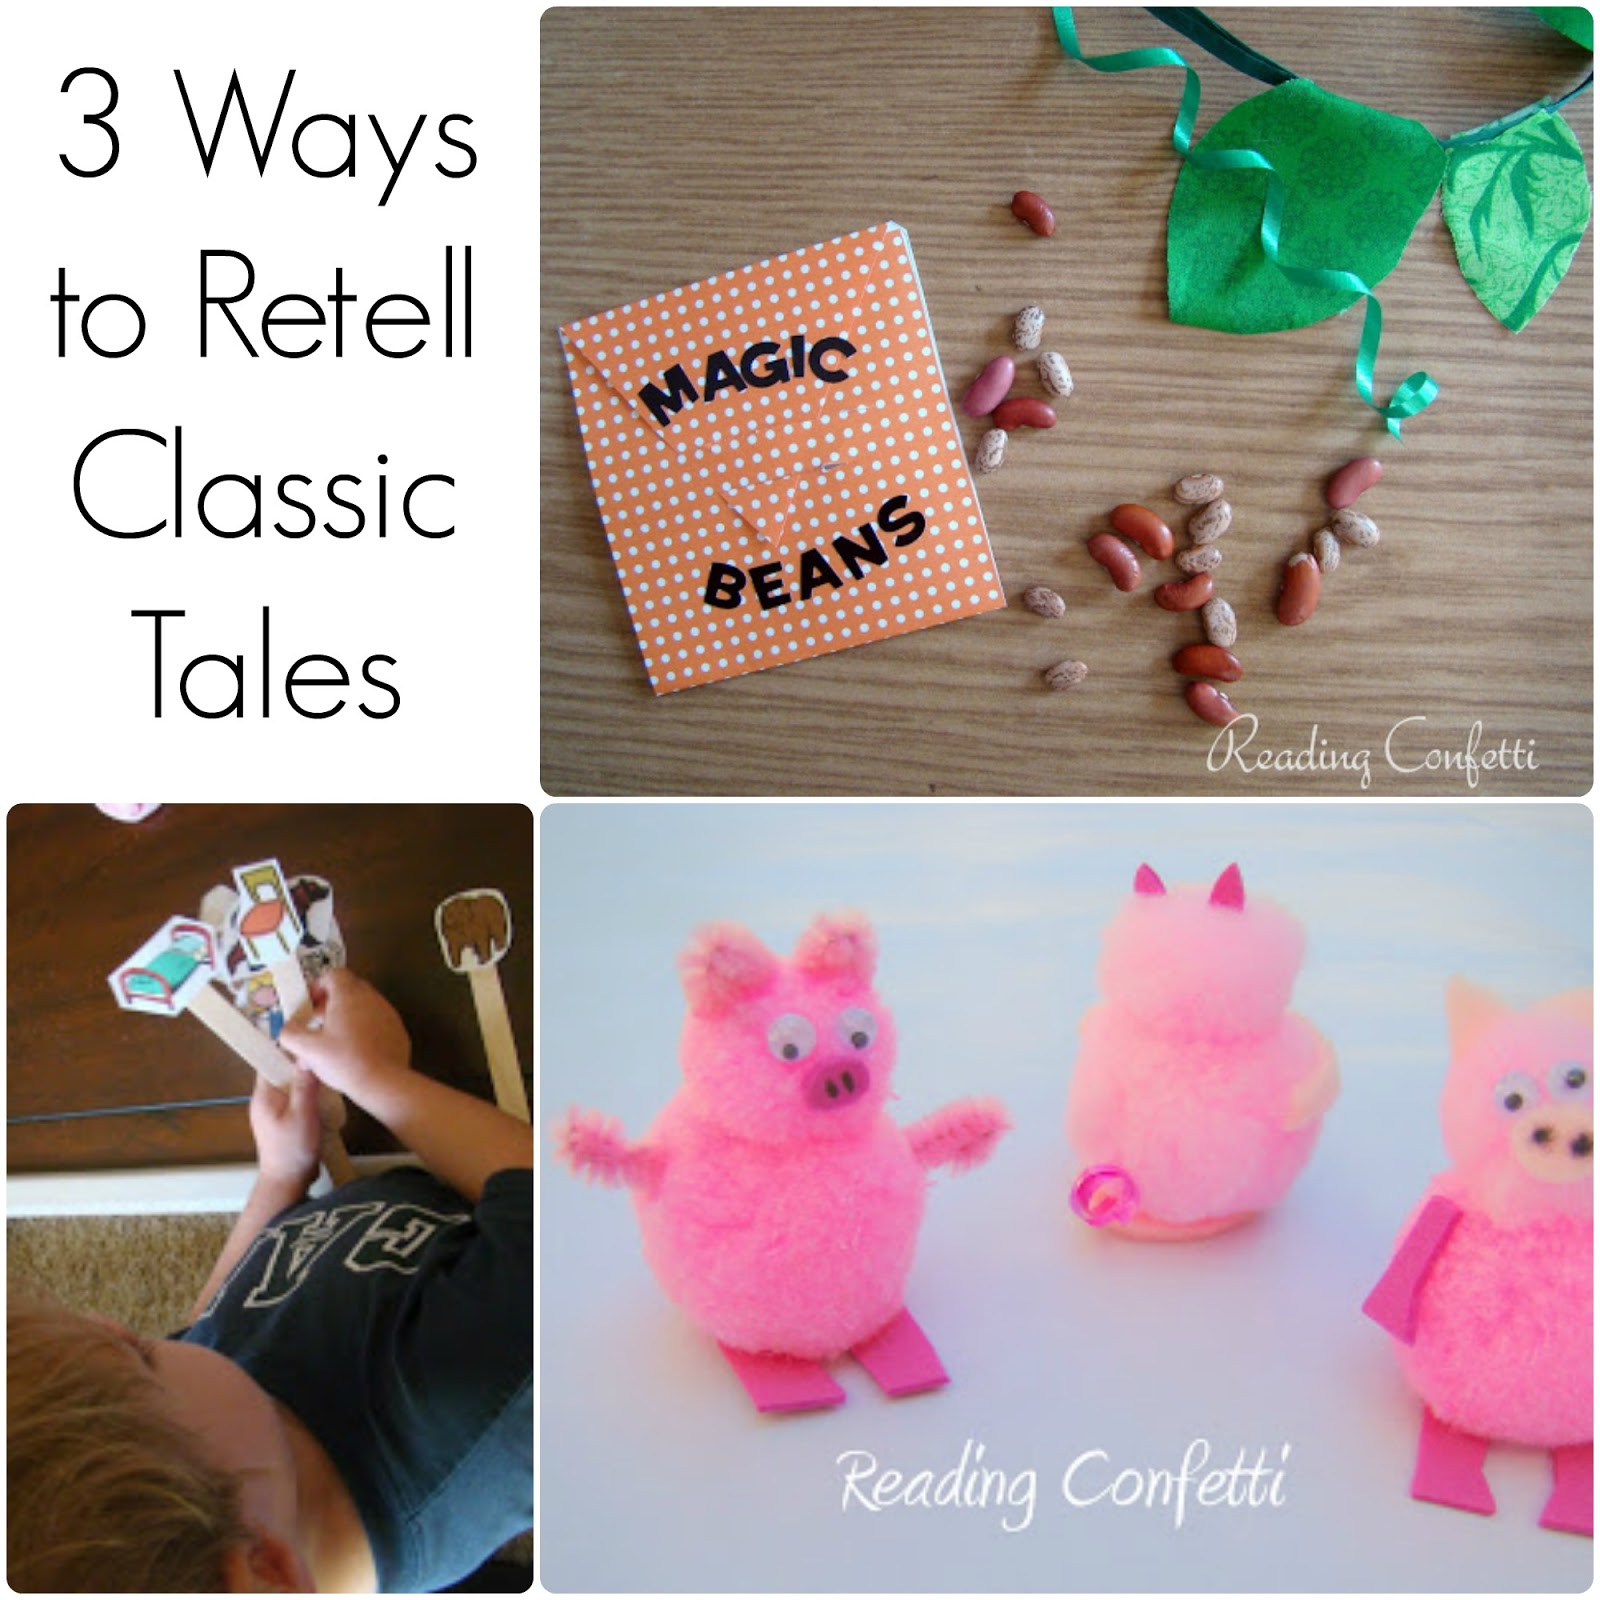 3 ways to retell classic tales